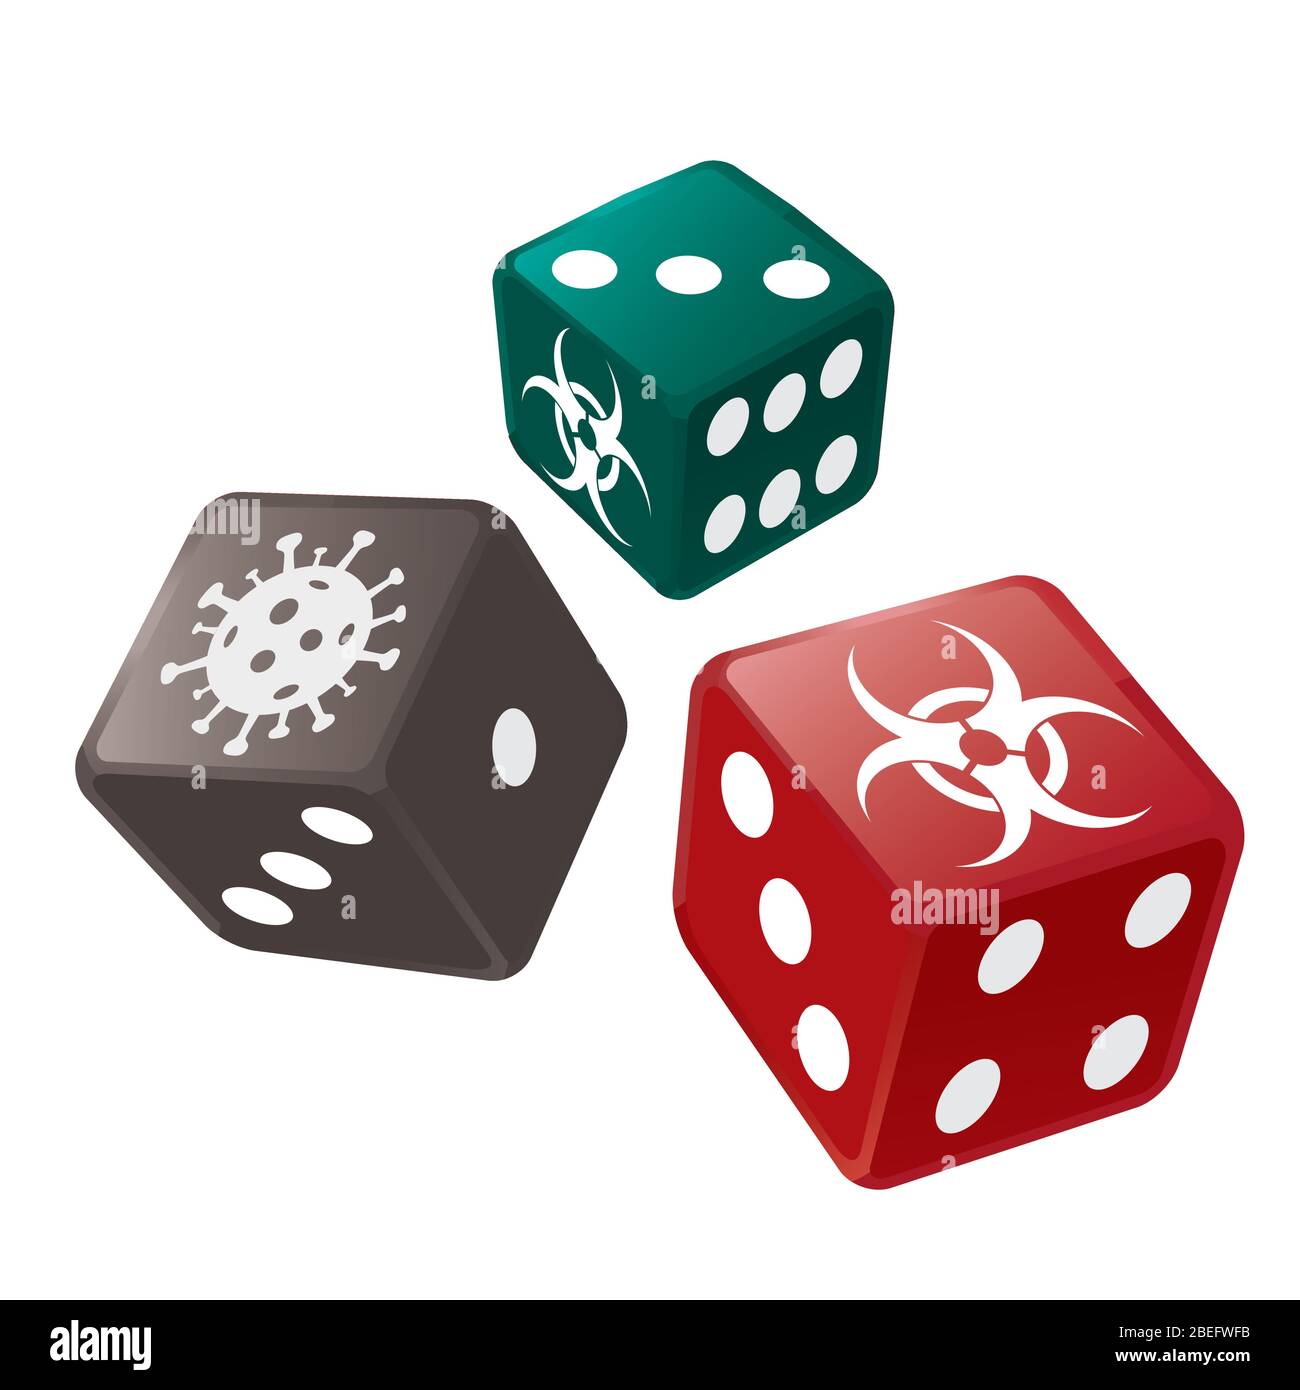 Casino Dice with biohazard and coronavirus symbols. Illustration of three colorful dices on red background. Vector available. Stock Vector